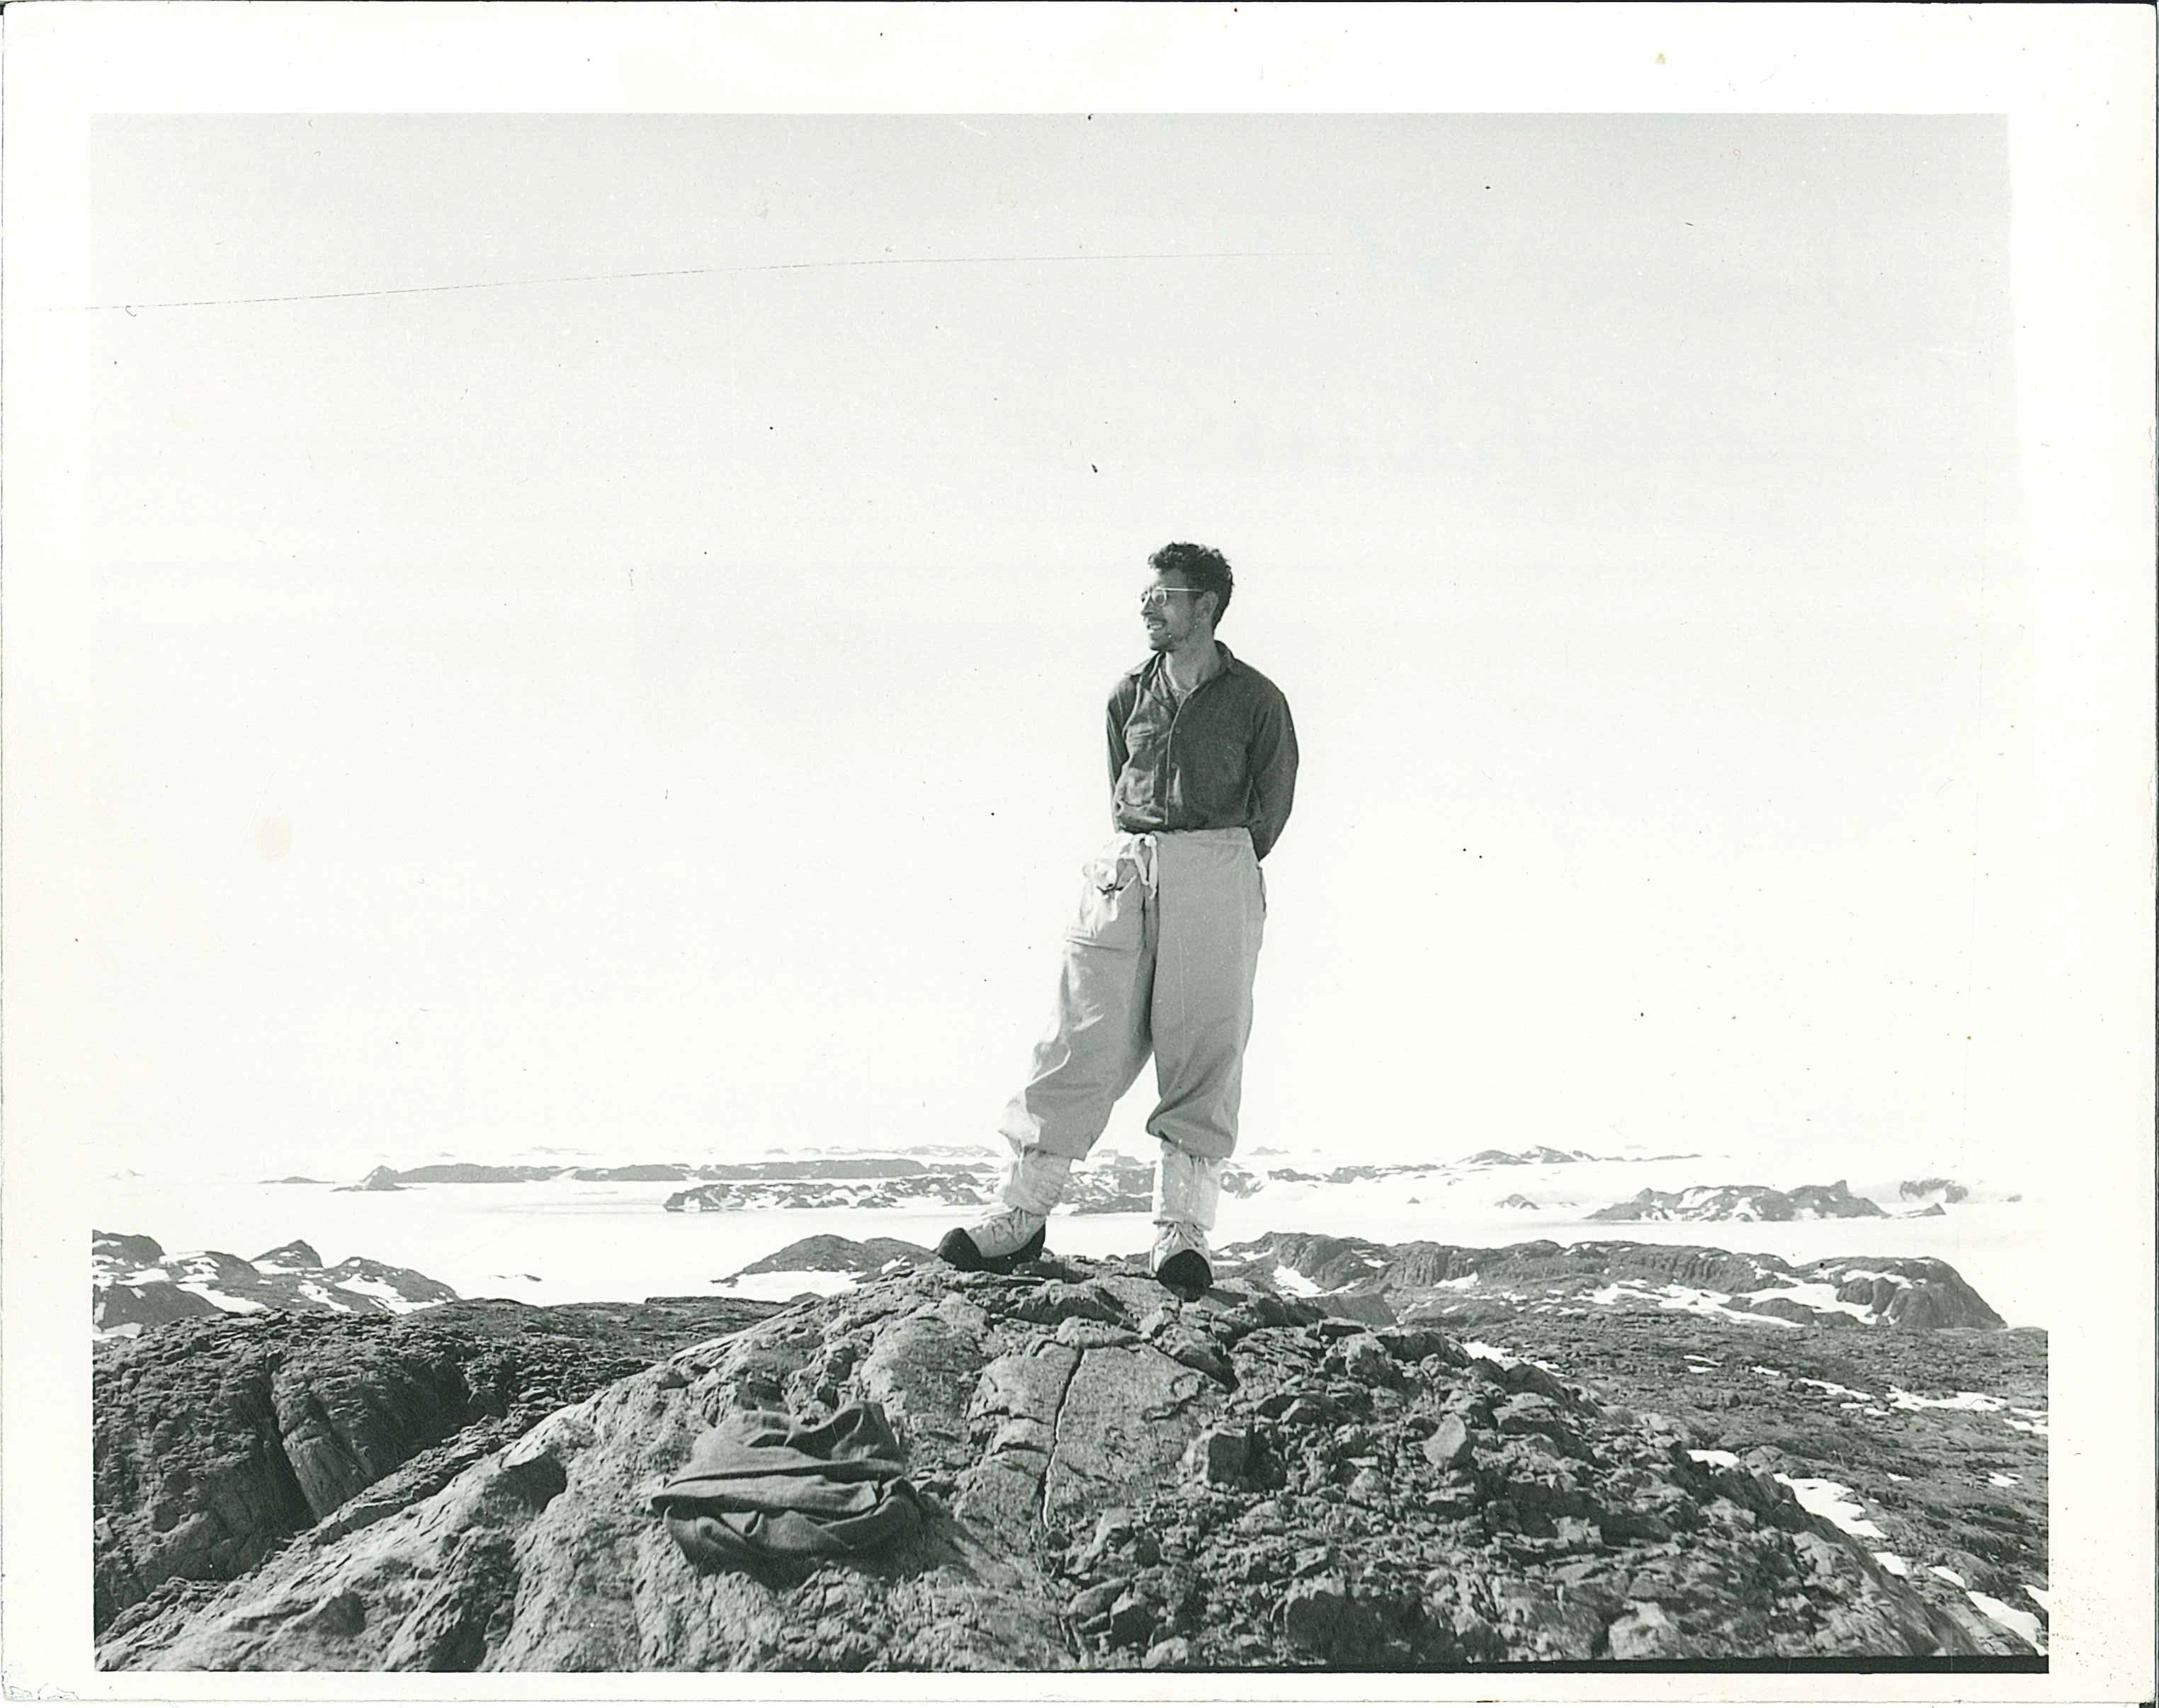 Bureau of Mineral Resources geologist, David Trail, conducting fieldwork in Antarctica in the early 1960's